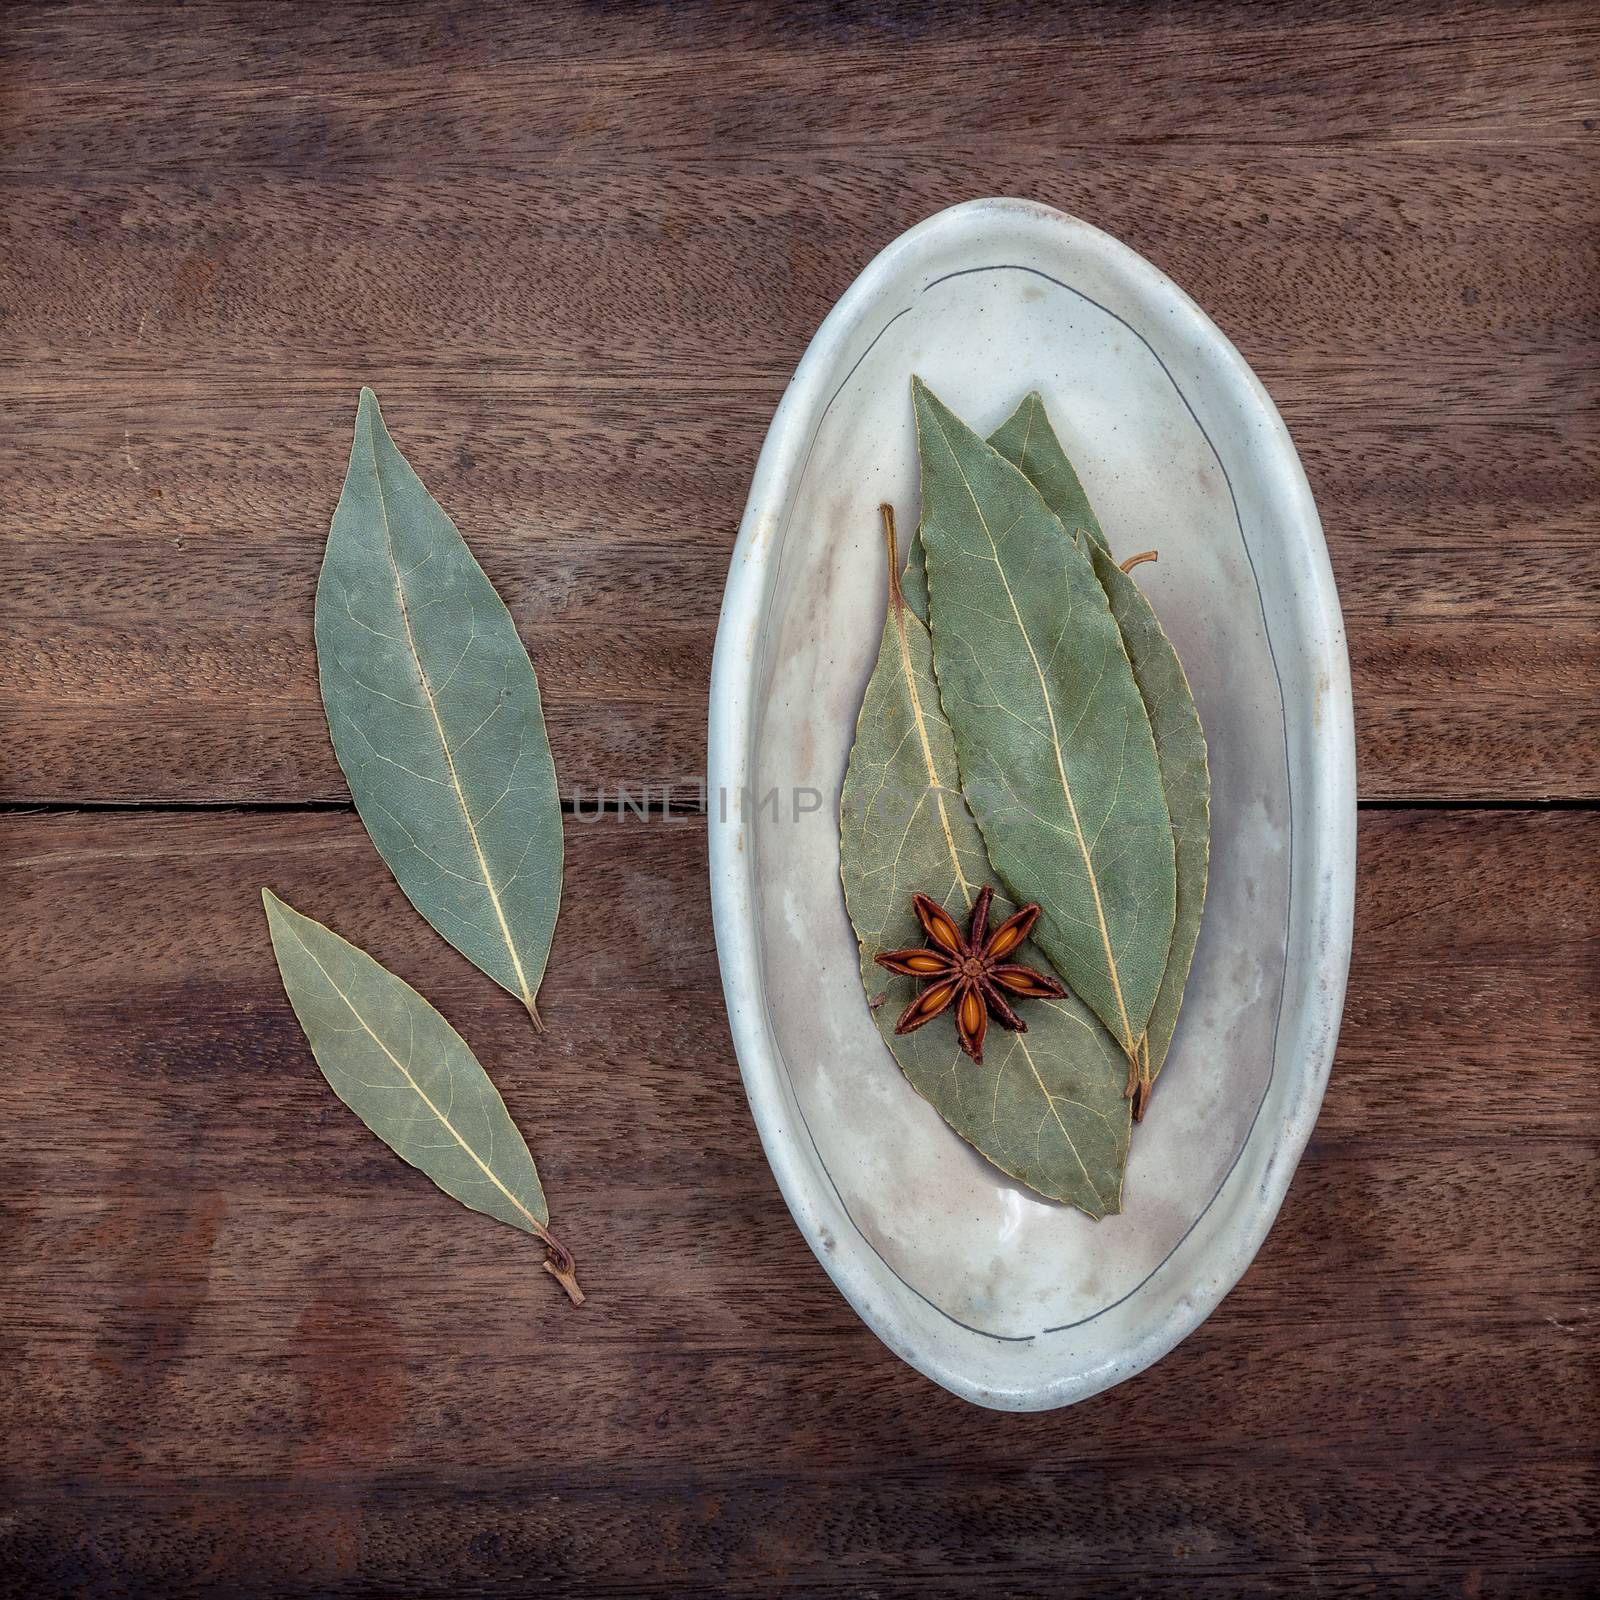 The Bowl of dried bay leaves on old wooden background.